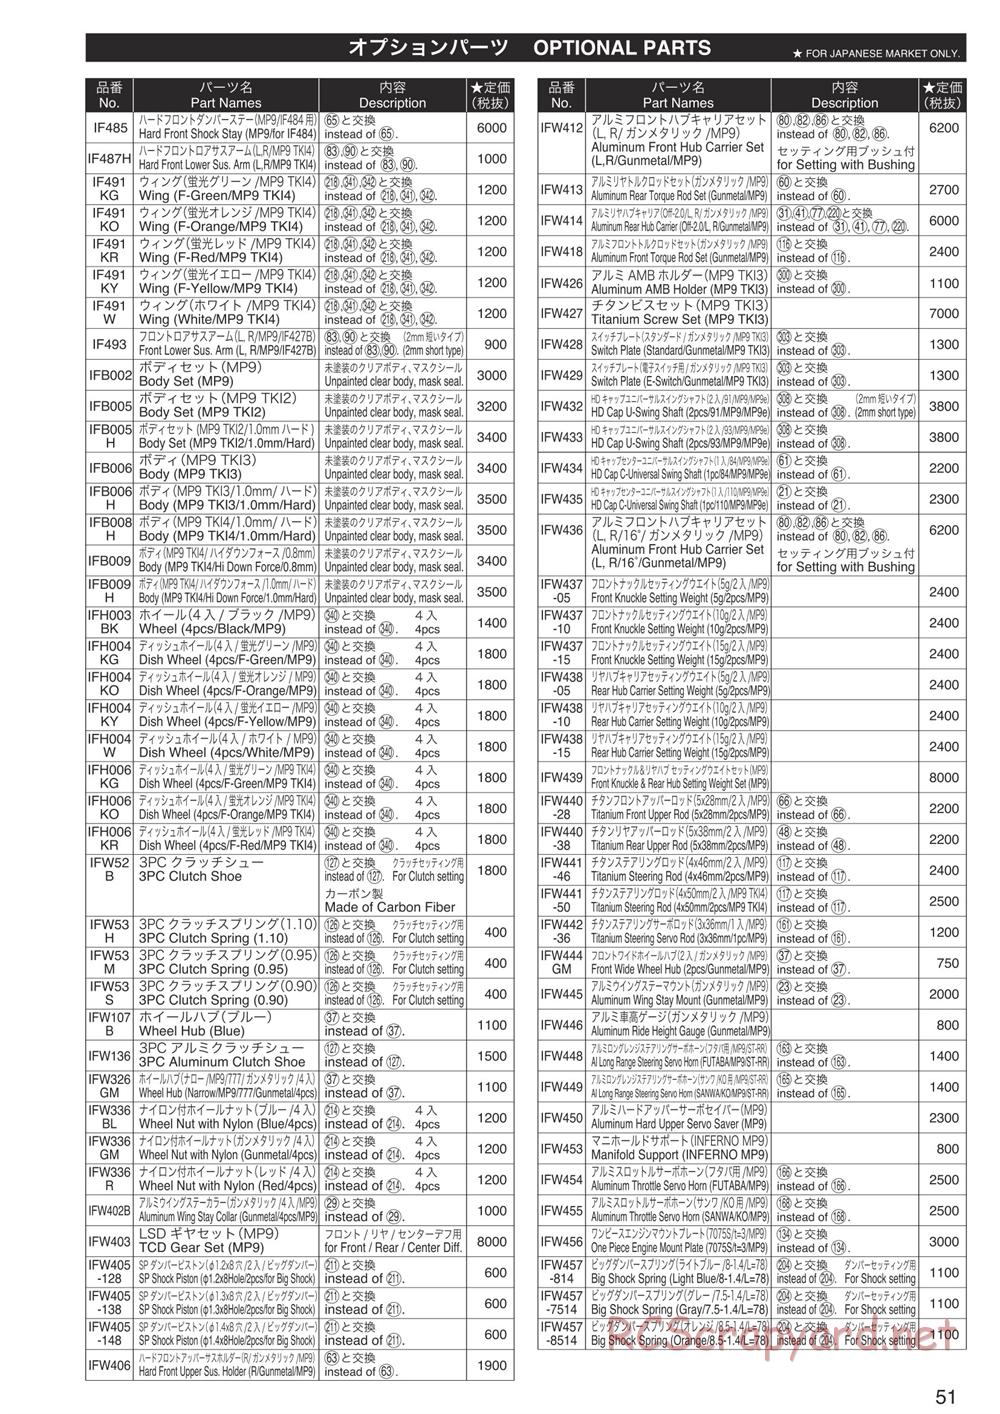 Kyosho - Inferno MP9 TKI4 10th Anniversary Special Edition - Parts List - Page 4